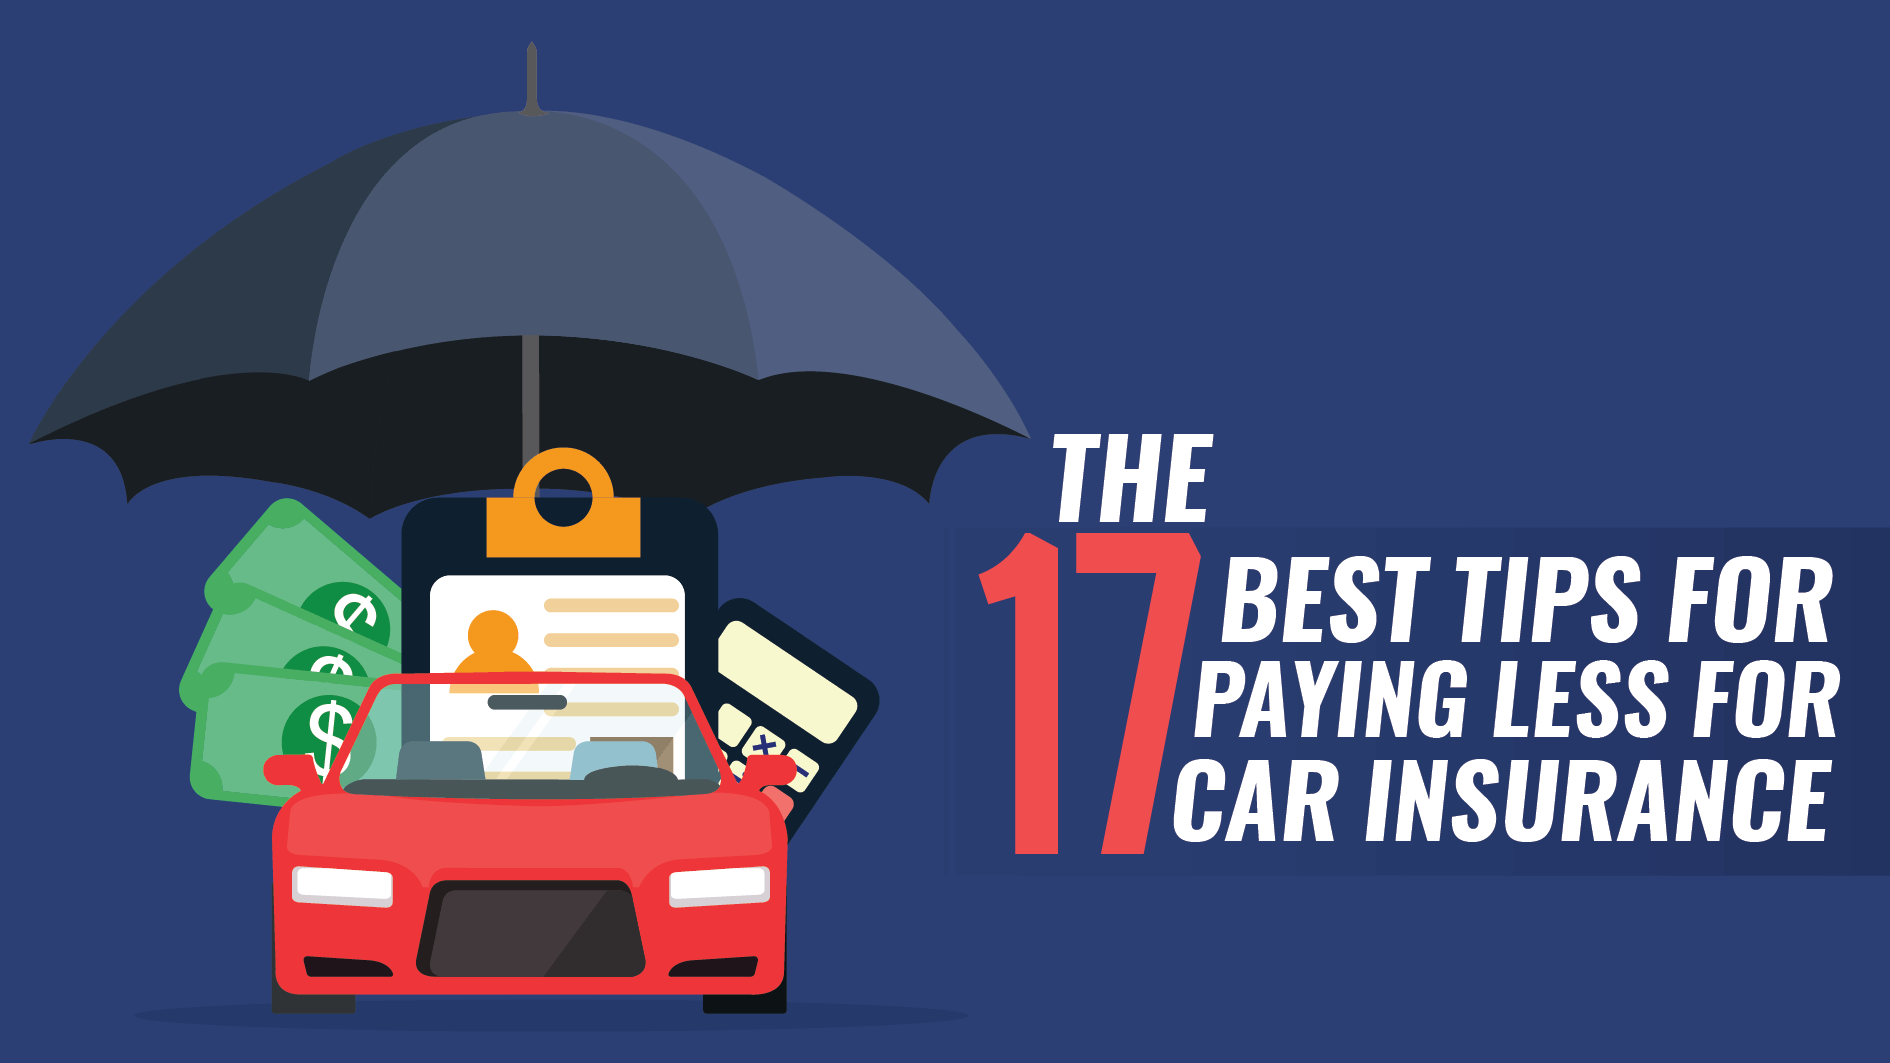 The 17 Best Tips to Pay Less for Car Insurance